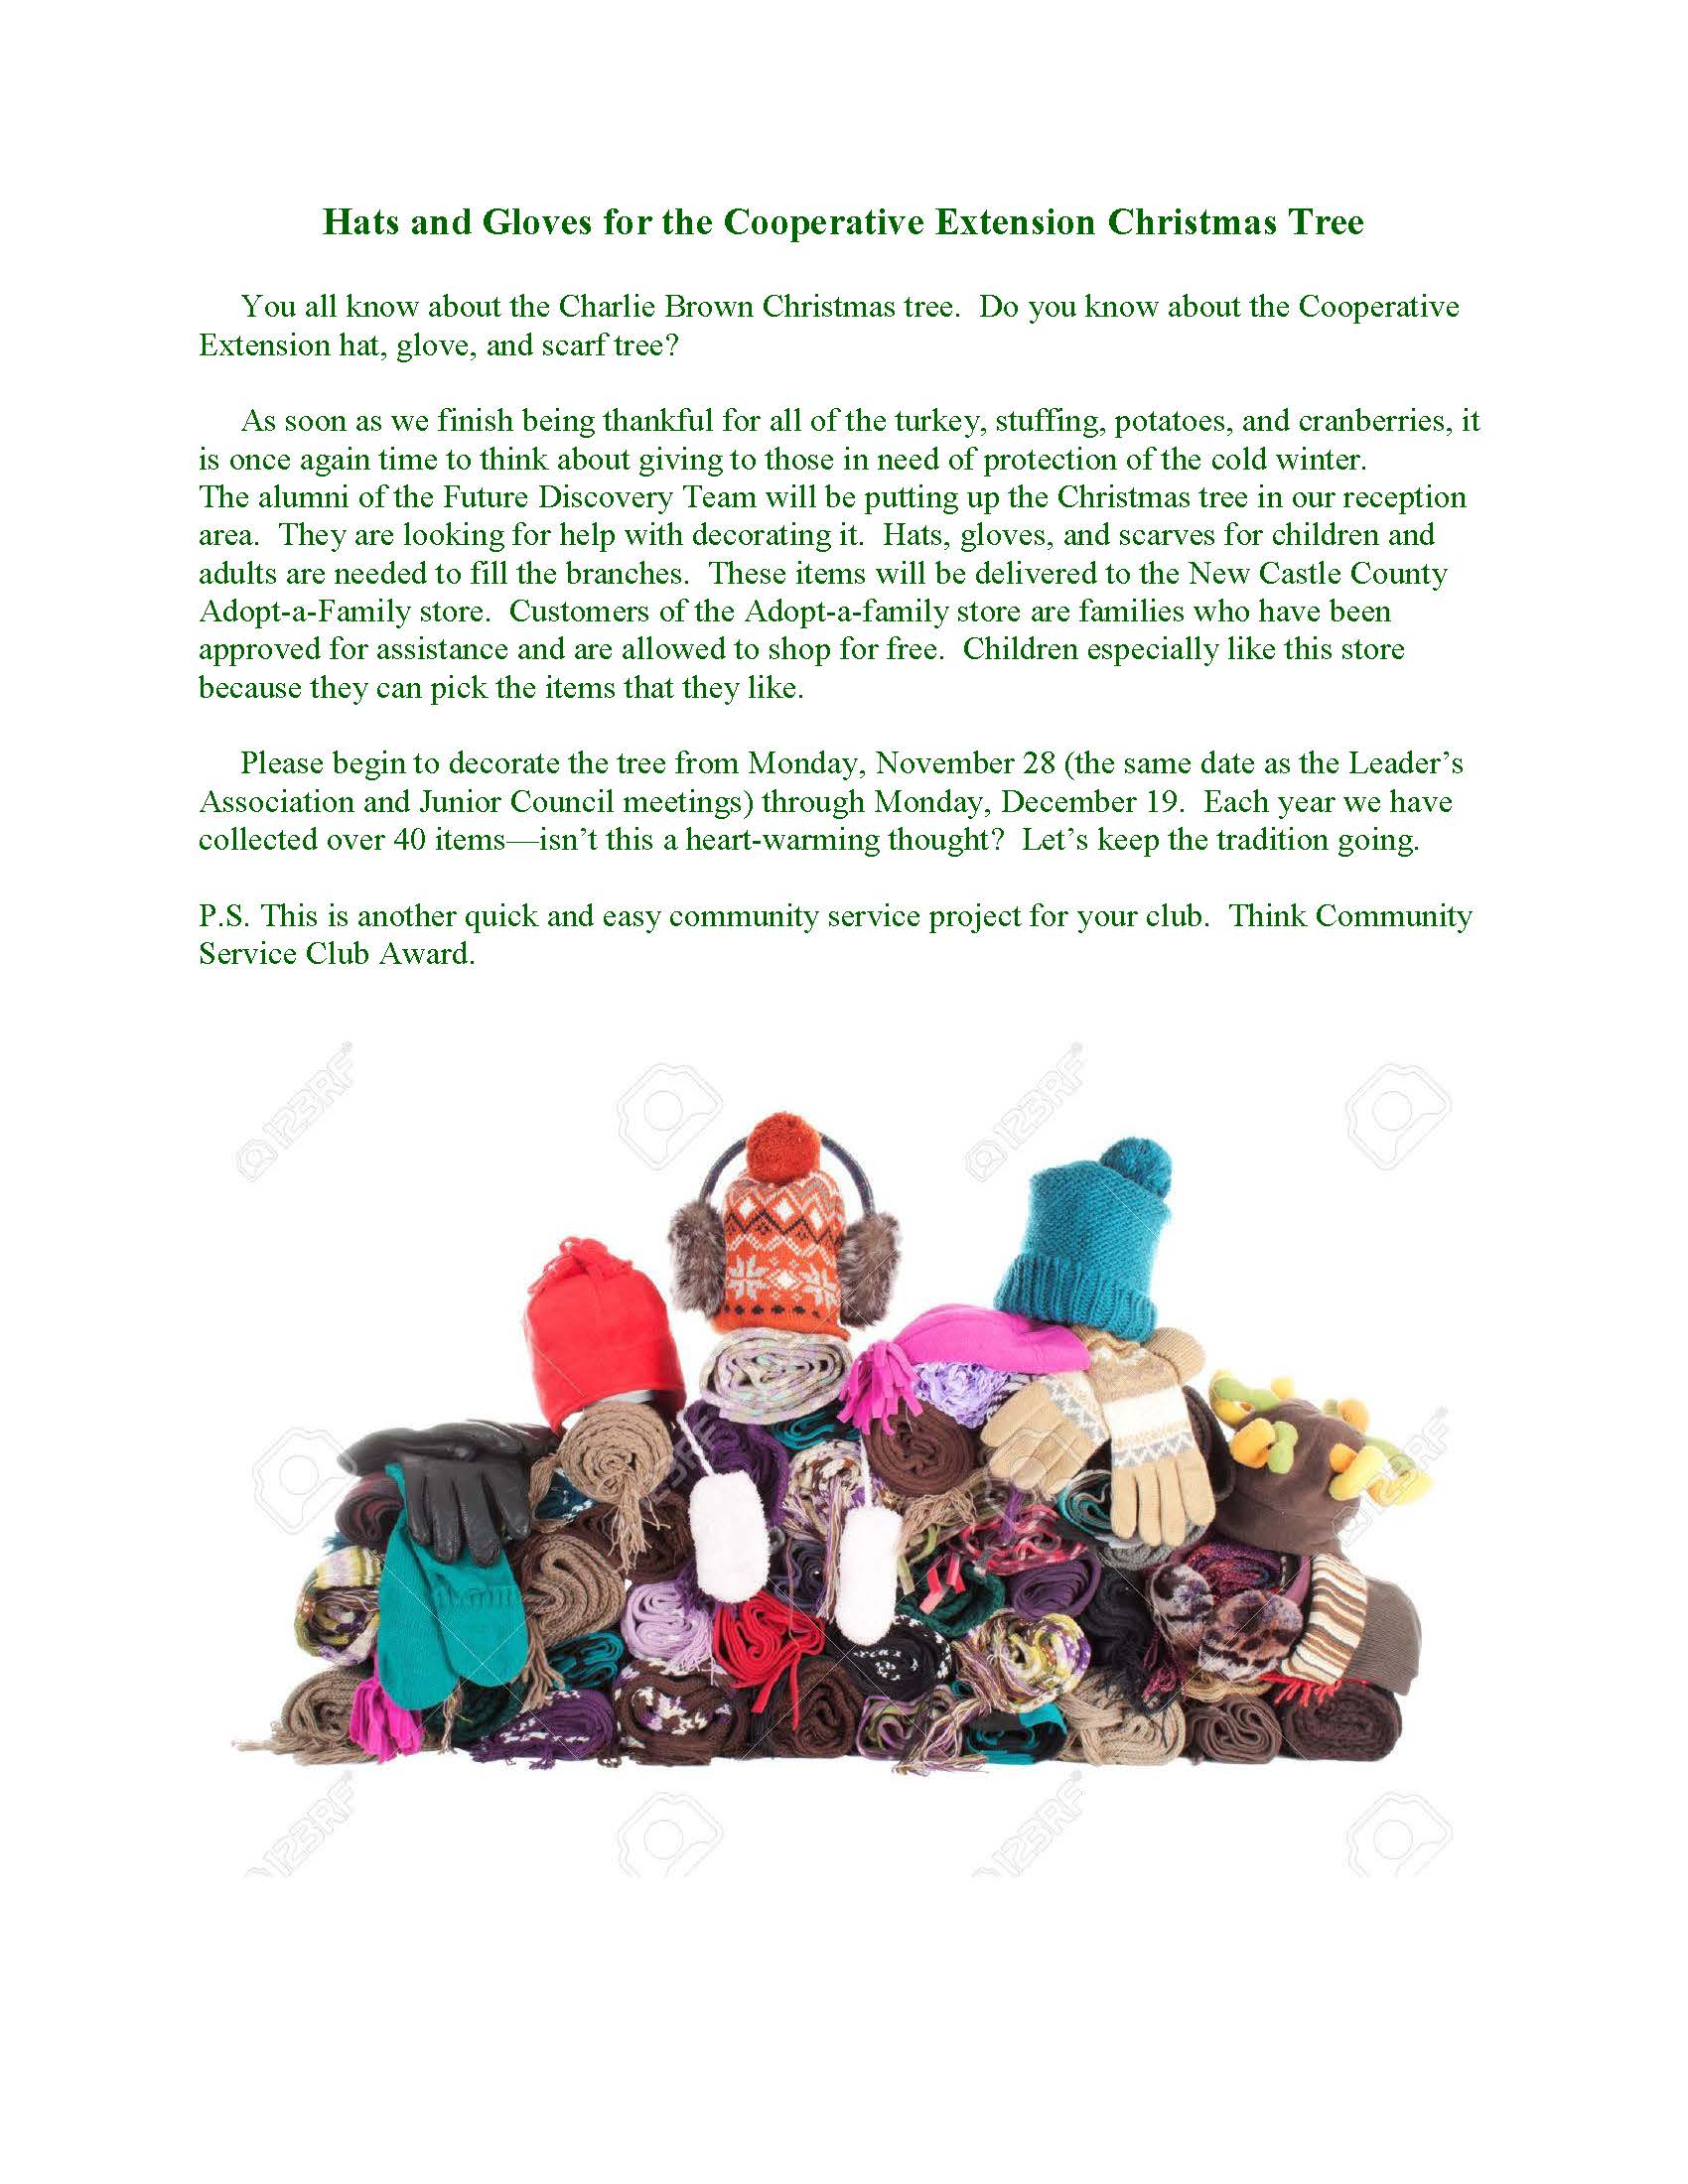 hats-and-gloves-for-the-cooperative-extension-christmas-tree